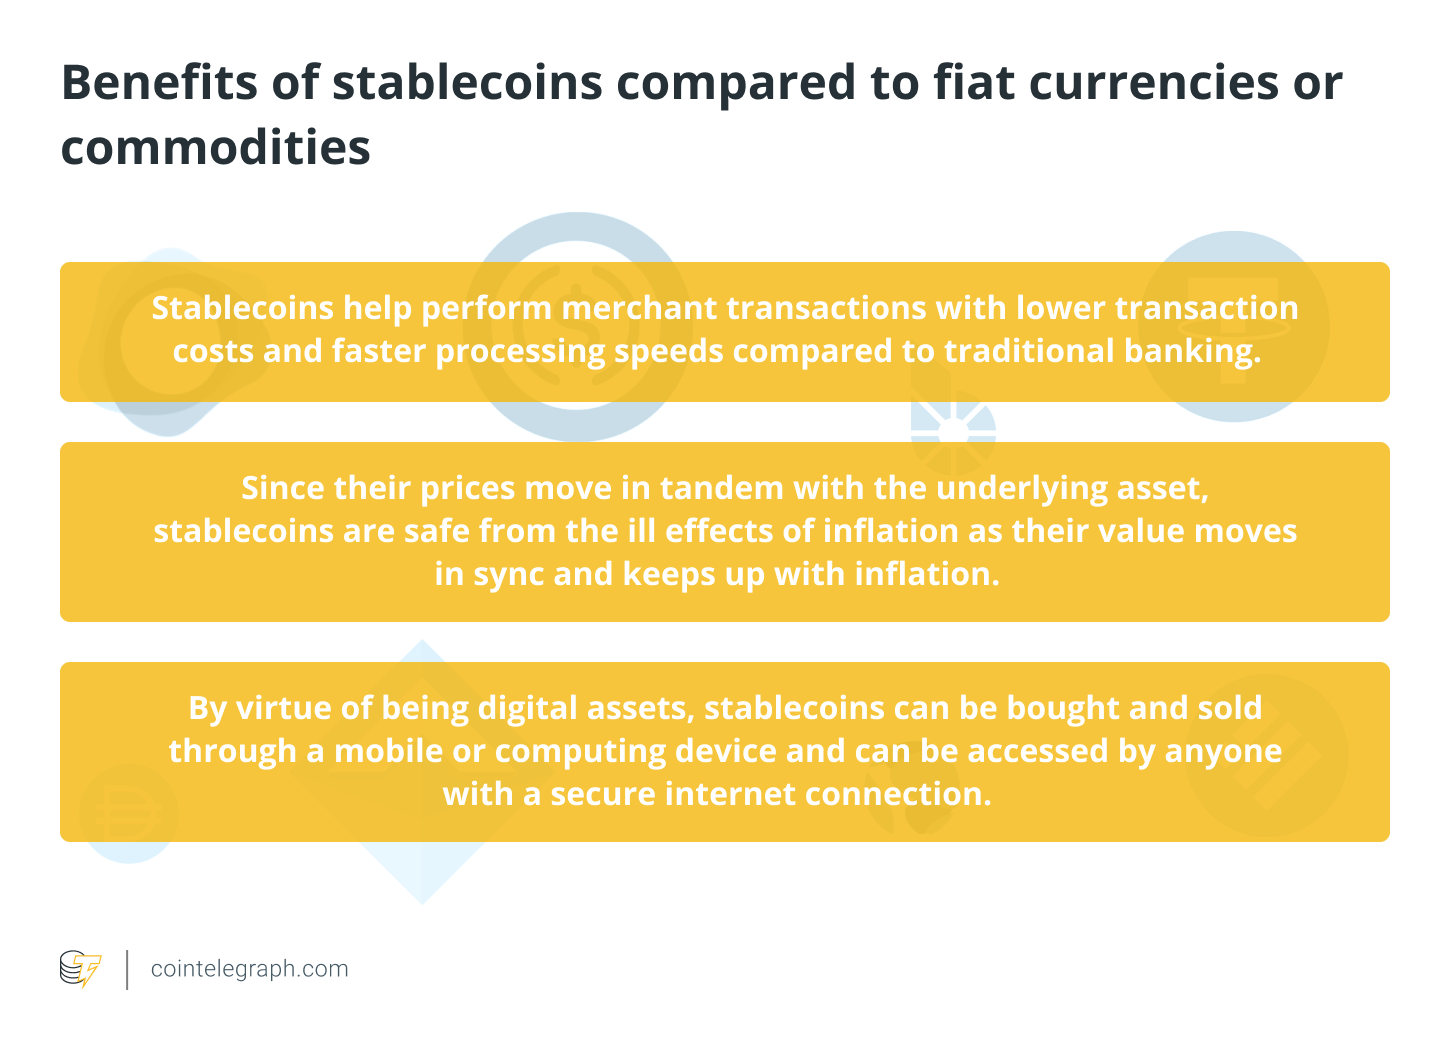 Benefits of stablecoins compared to fiat currencies or commodities